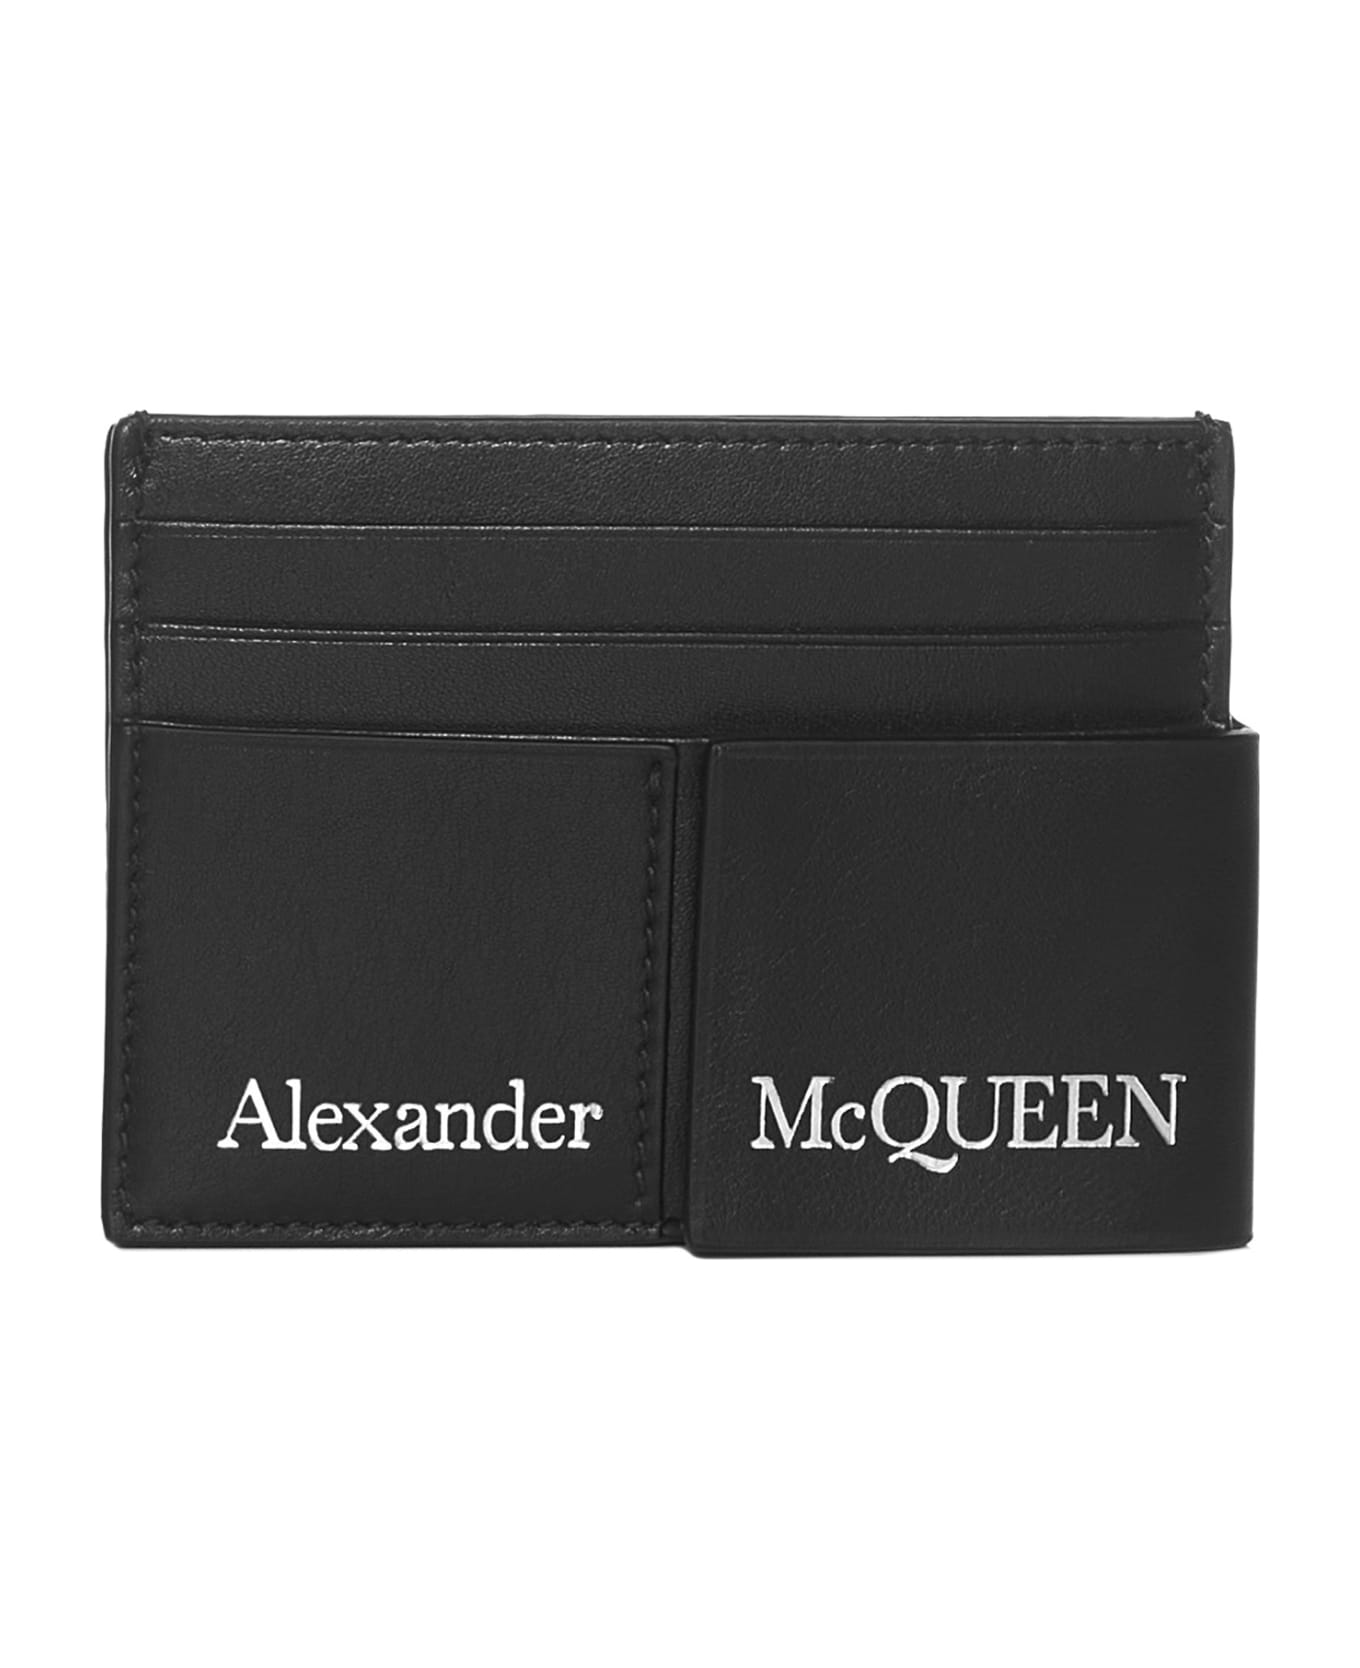 Alexander McQueen Double Card Holder In Black Leather With Logo - Nero 財布